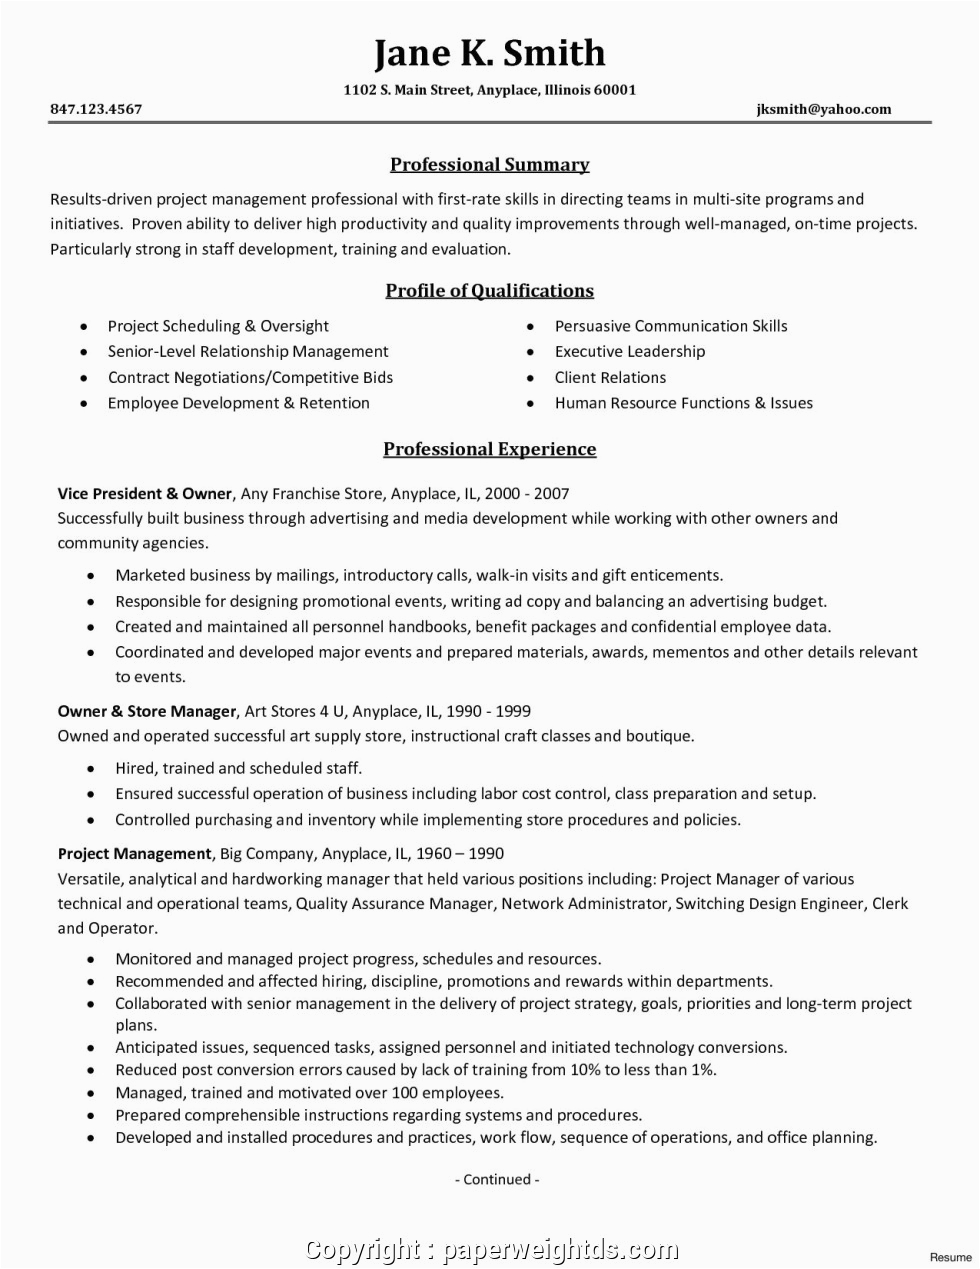 Entry Level Project Manager Sample Resume Modern Entry Level Program Manager Resume Entry Level